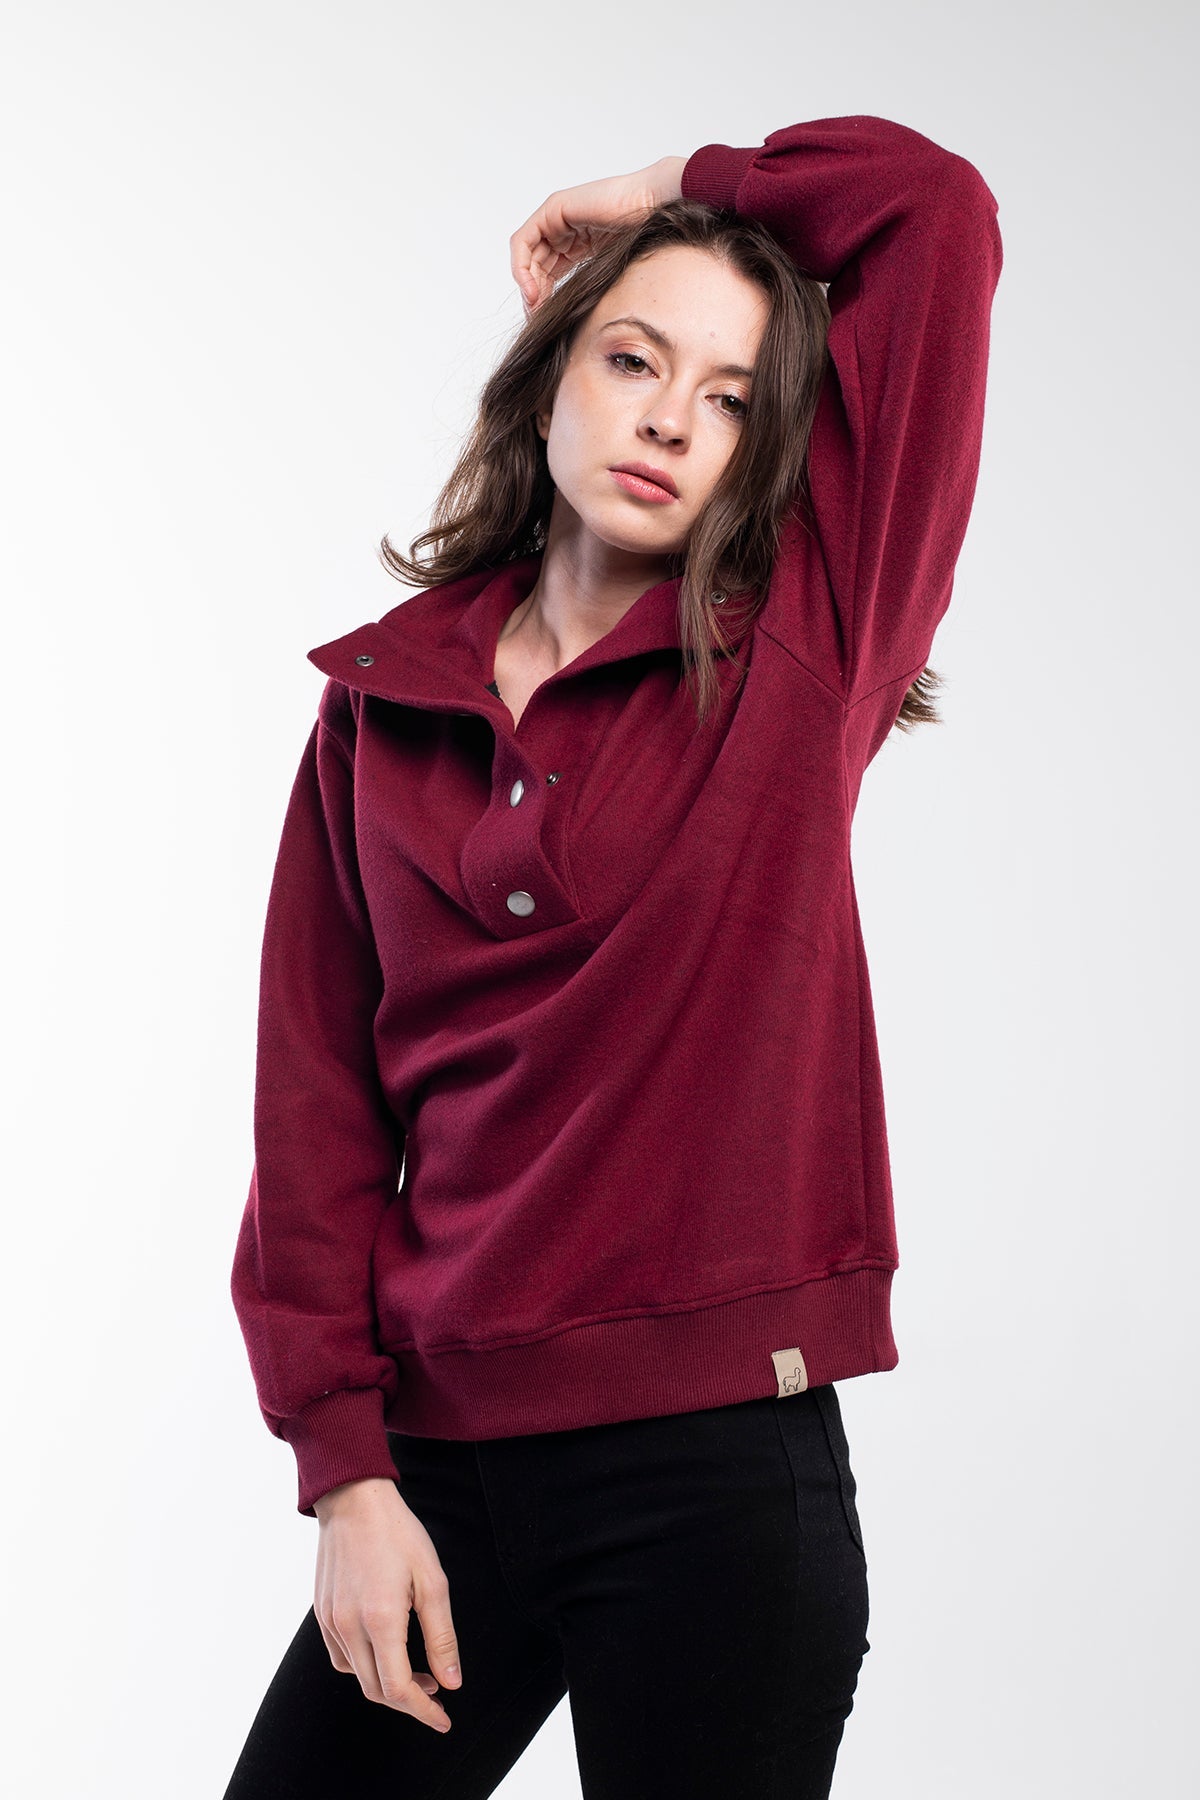 Sweater with a buttoned high neck in fuchsia purple for women.